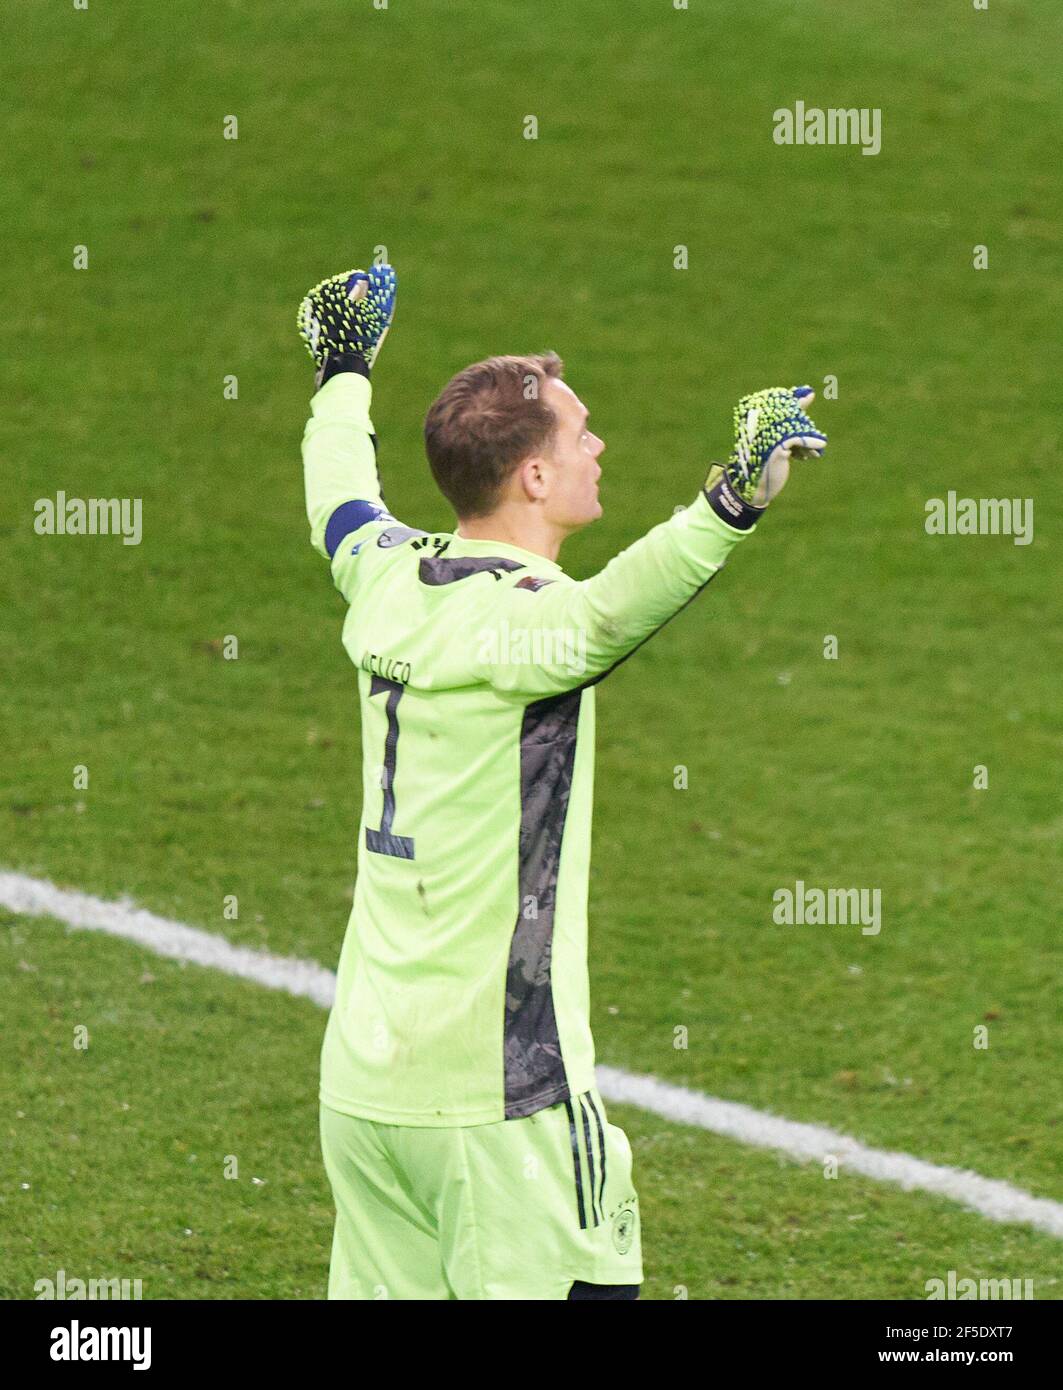 Manuel NEUER, DFB 1 goalkeeper, schlussjubel in the match GERMANY - ICELAND  Deutschland - ISLAND Qualification for World Championships, WM Quali, Season 2020/2021,  March 25, 2021  in Duisburg, Germany.  © Peter Schatz / Alamy Live News  Important: DFB regulations prohibit any use of photographs as image sequences and/or quasi-video. Stock Photo